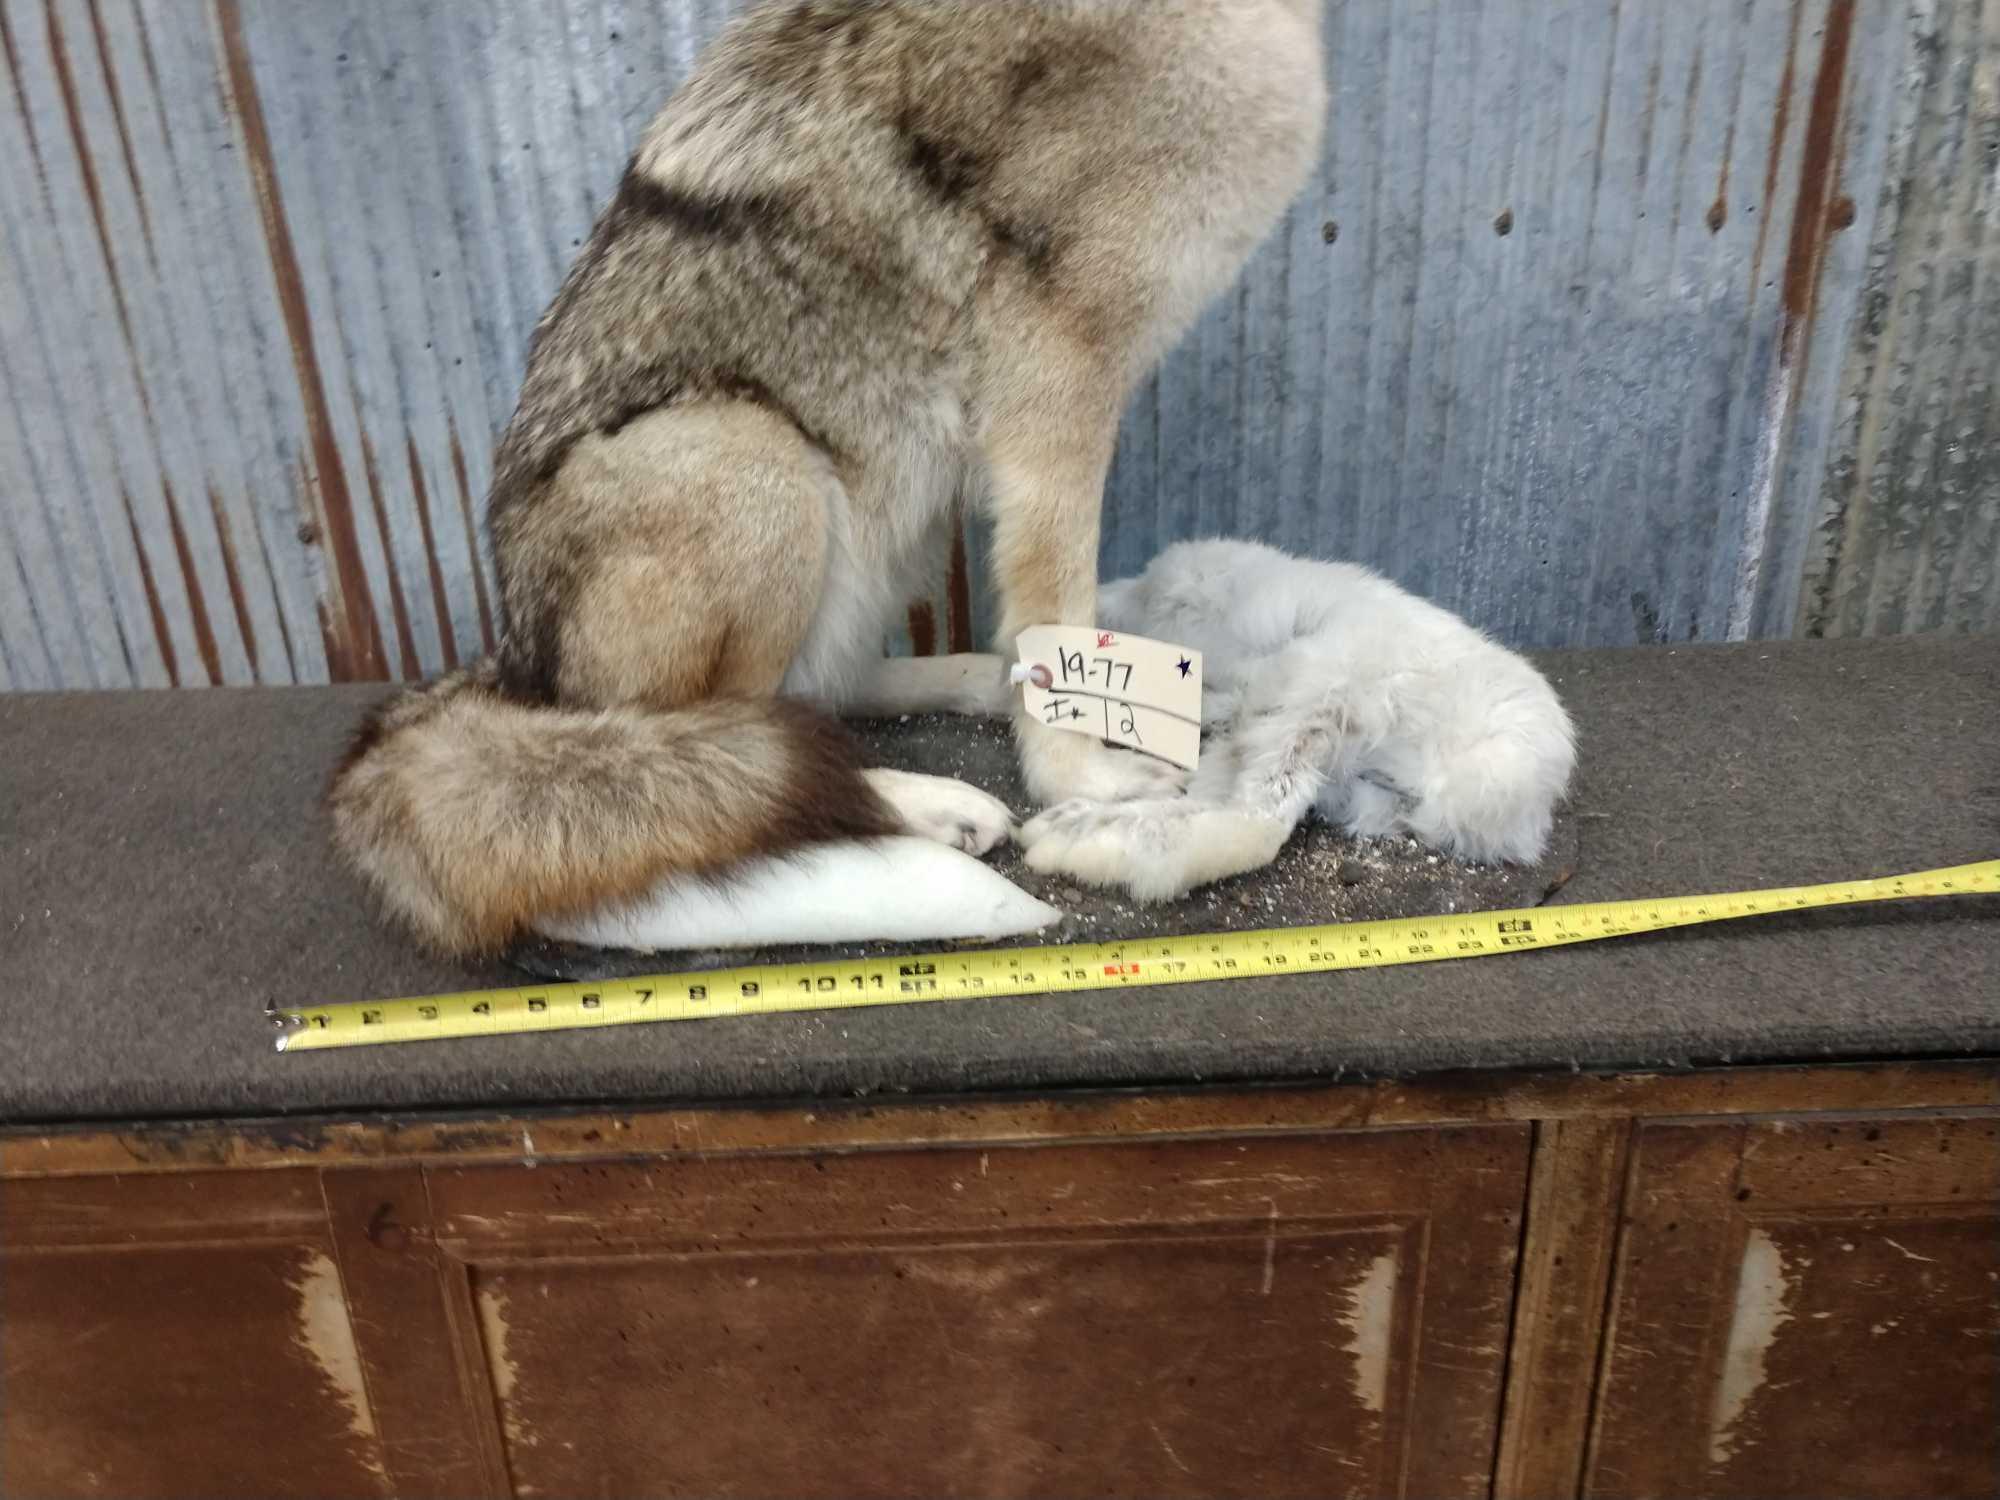 Sold at Auction: Howling Coyote Full Body Taxidermy Mount